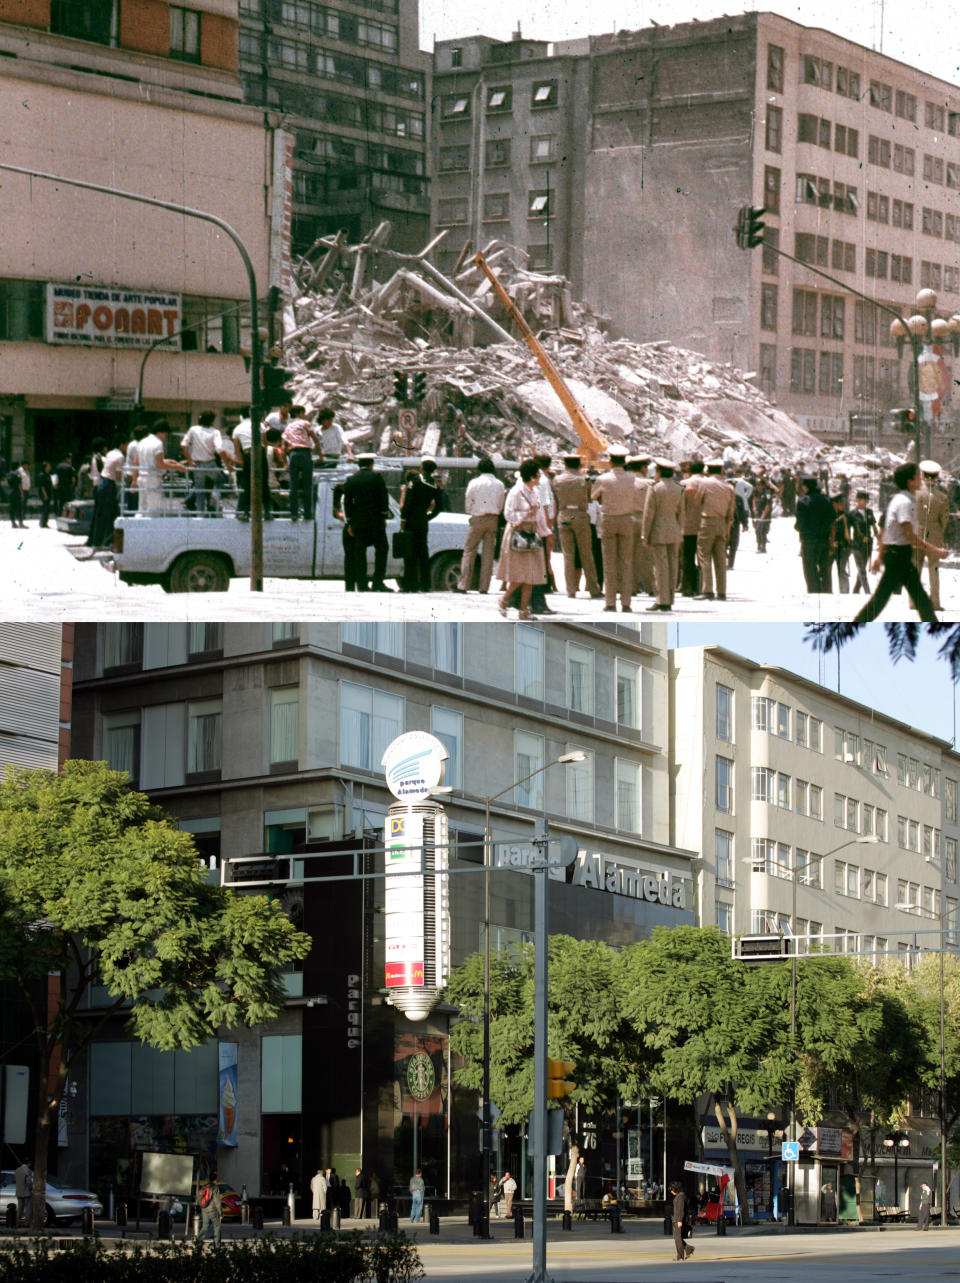 File photo shows a building in Mexico City collapsing during earthquake and same location on September 19, 2005.  A combination photo shows a building in Mexico City's central Alameda park square collapsing after an earthquake in Mexico in a September 19, 1985 file photo (top) and the same location (bottom) on September 19, 2005. The devastating aftermath of Hurricane Katrina has stirred up memories of the earthquake that reduced parts of Mexico City to rubble 20 years ago, but the capital has armed itself for the next time disaster hits. The earthquake, measuring a giddy 8.1 on the Richter scale, caught Mexico off guard, killing thousands as it toppled housing blocks and office buildings in a city built on the soft mud left by a dried-up pre-Hispanic lake. Mexico's President Vicente Fox will host a memorial service on Monday for the victims. REUTERS/Daniel Aguilar/File